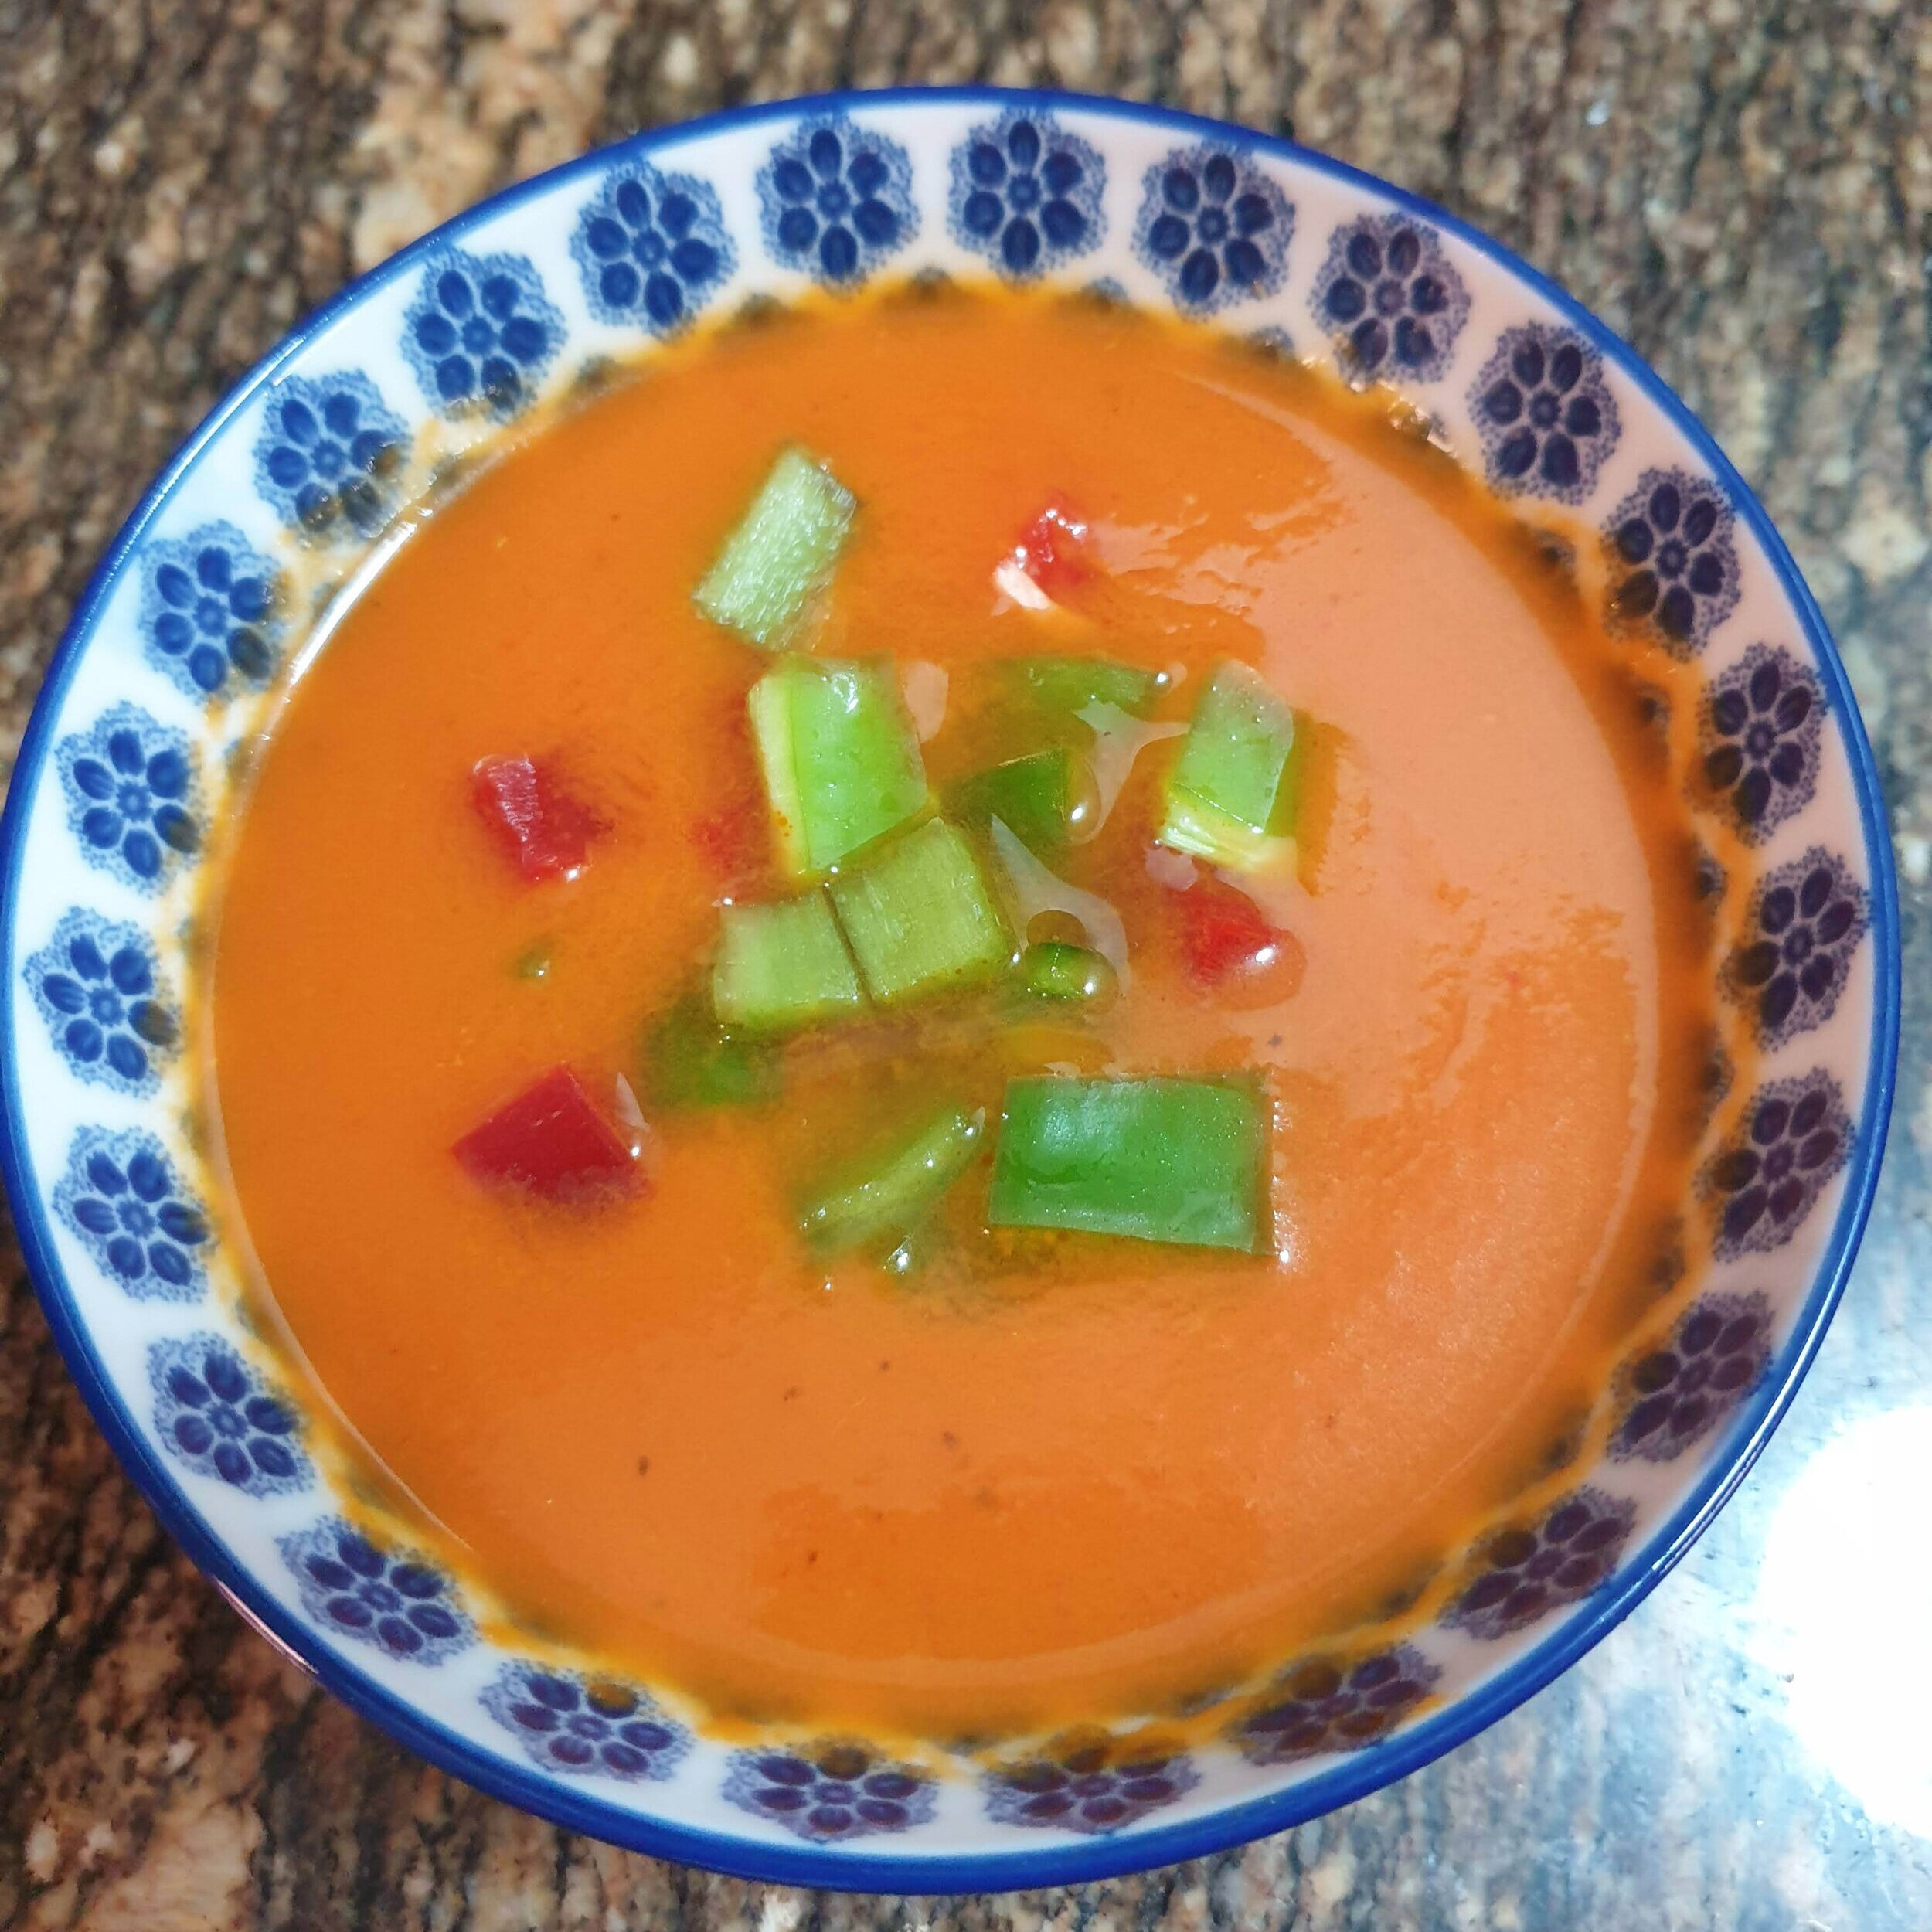 You can serve gazpacho plain in a glass or with toppings in a bowl.